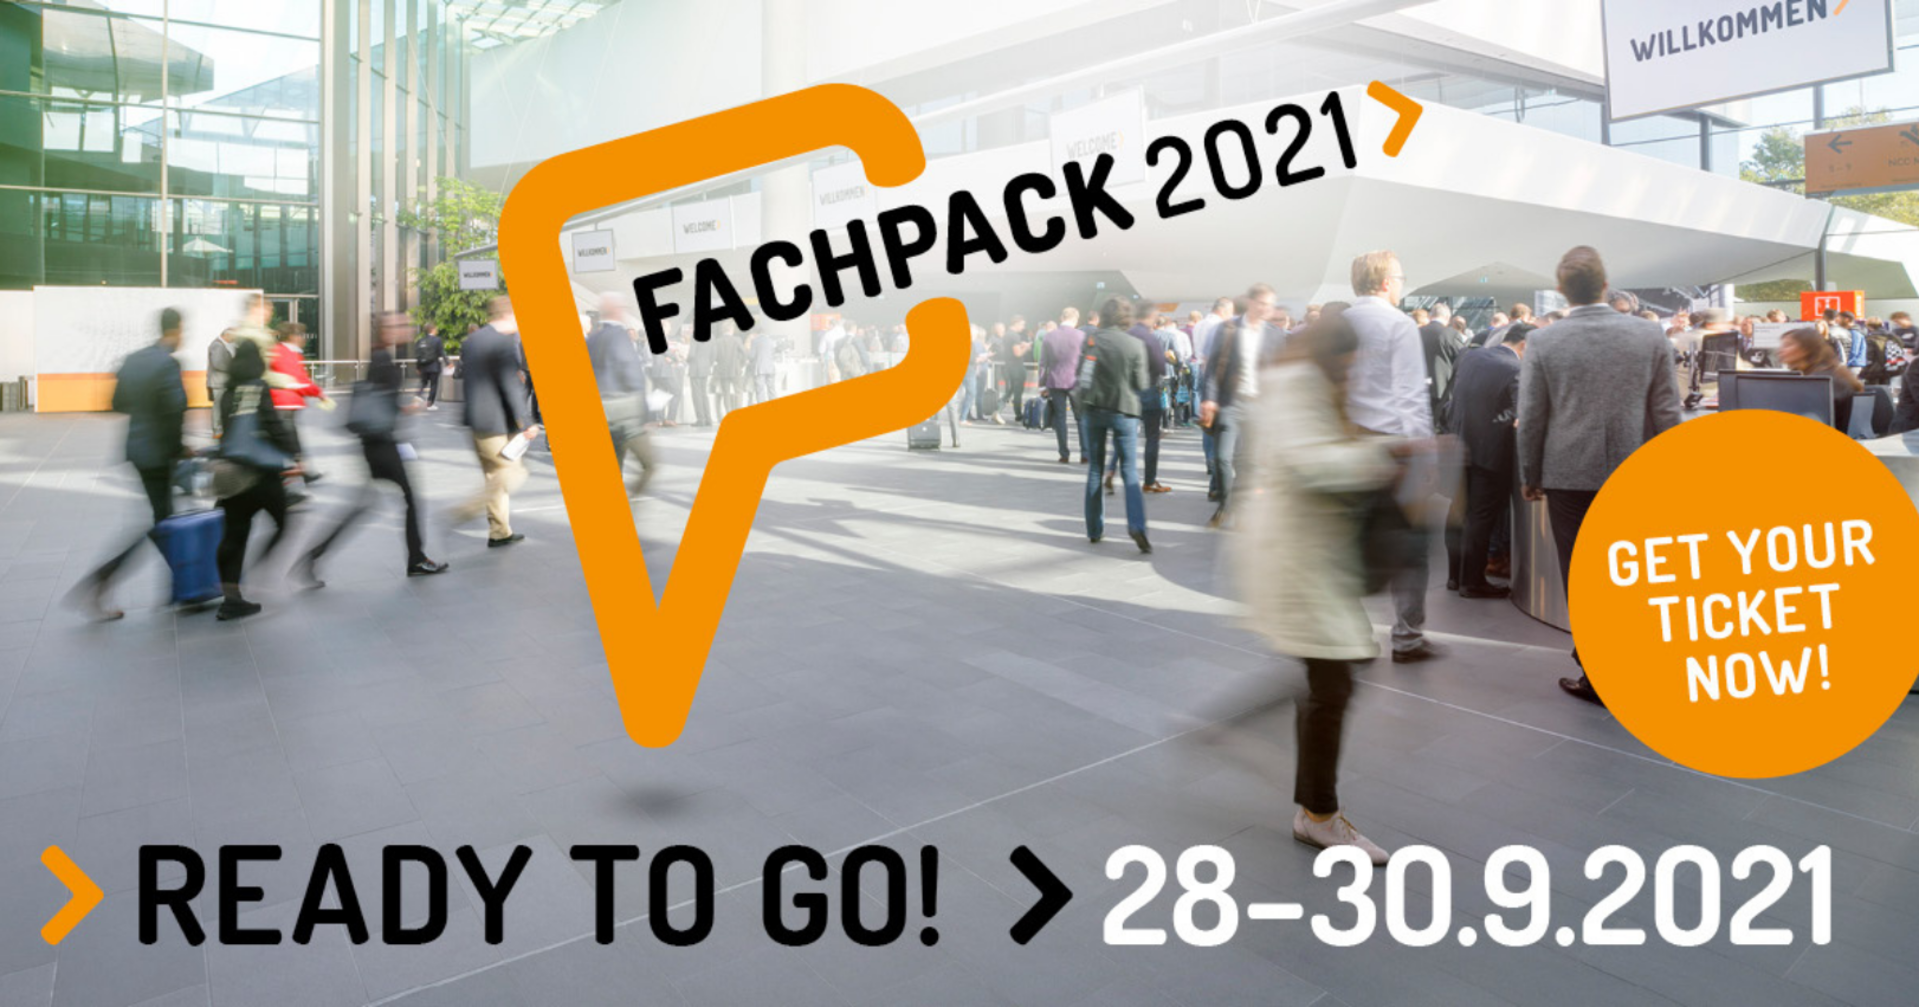 Banner of Fachpack 2021, European exhibition for packaging, processing, and technology to be held in Nuremberg Germany from 28th to 30th September 2021.